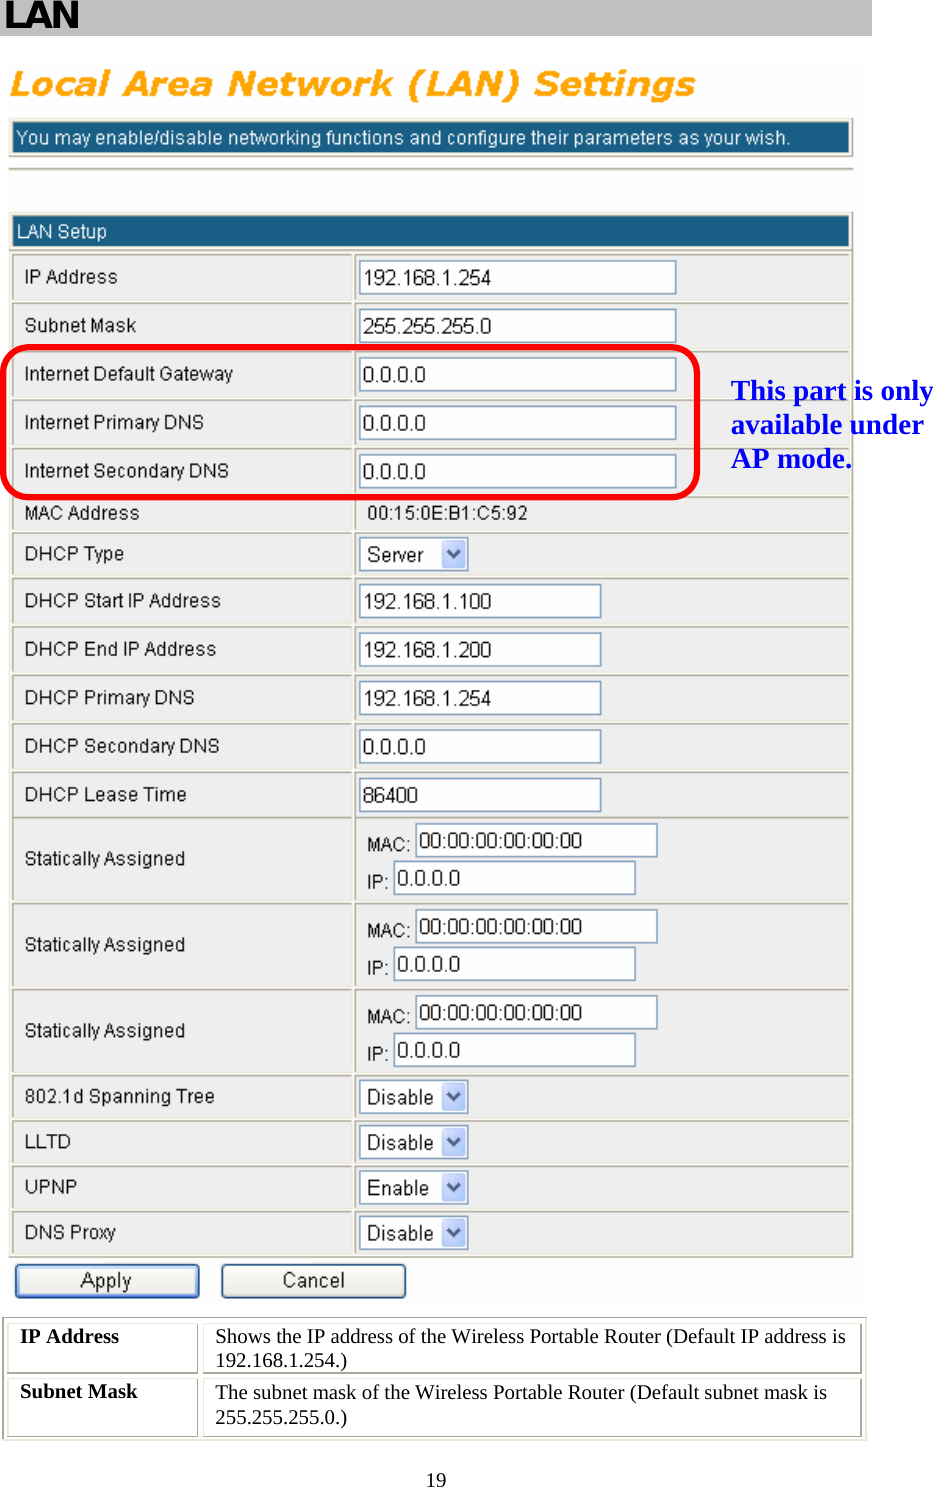   19LAN   IP Address  Shows the IP address of the Wireless Portable Router (Default IP address is 192.168.1.254.) Subnet Mask  The subnet mask of the Wireless Portable Router (Default subnet mask is 255.255.255.0.) This part is only available under AP mode. 